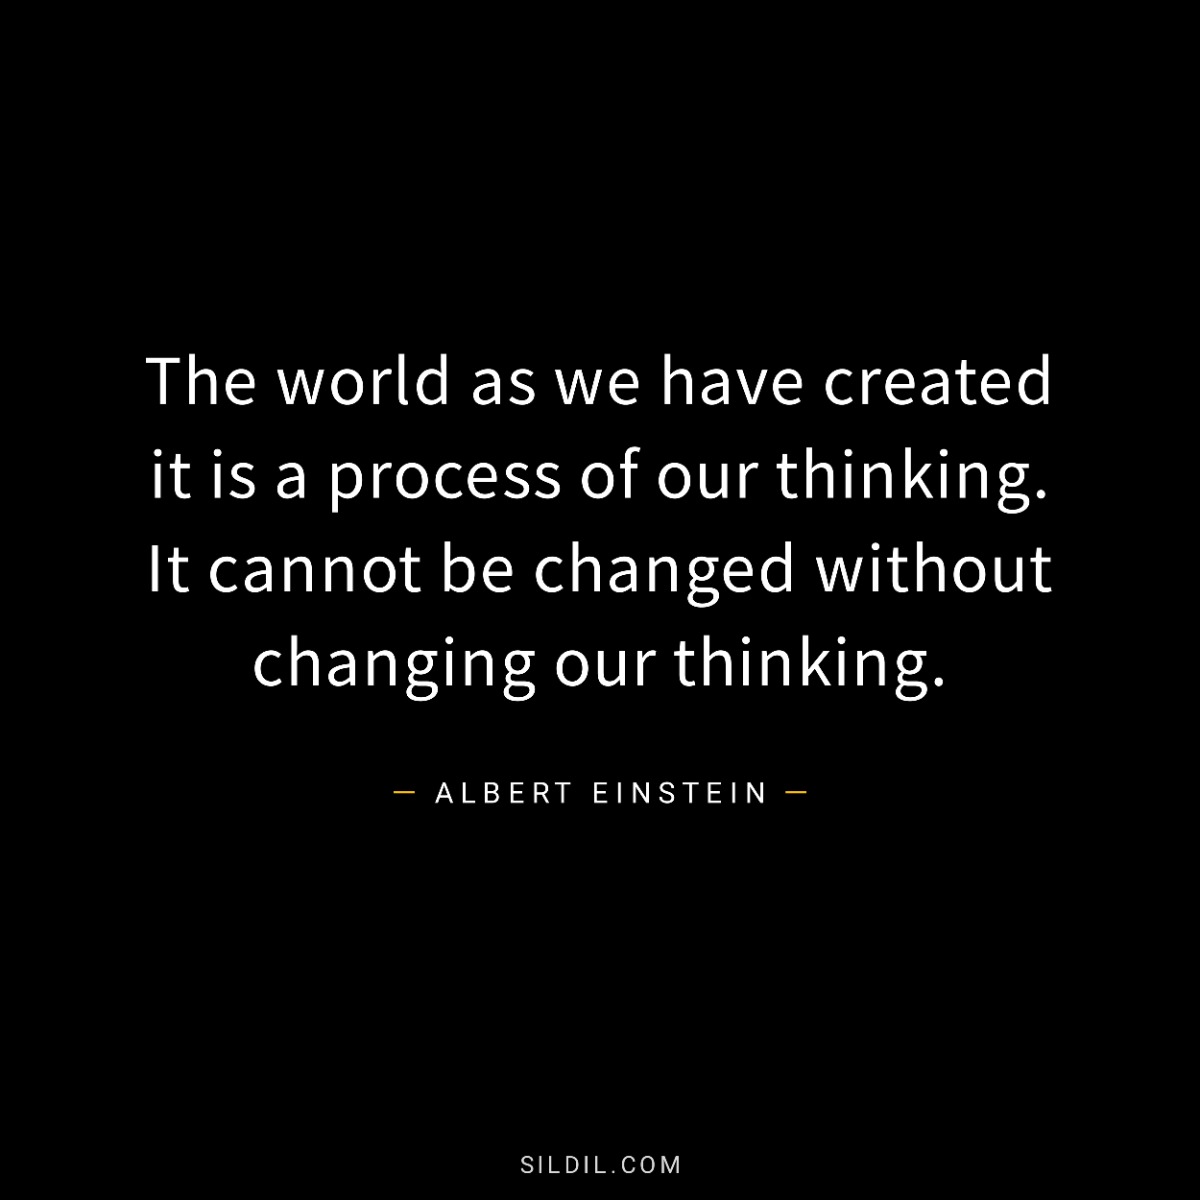 The world as we have created it is a process of our thinking. It cannot be changed without changing our thinking.